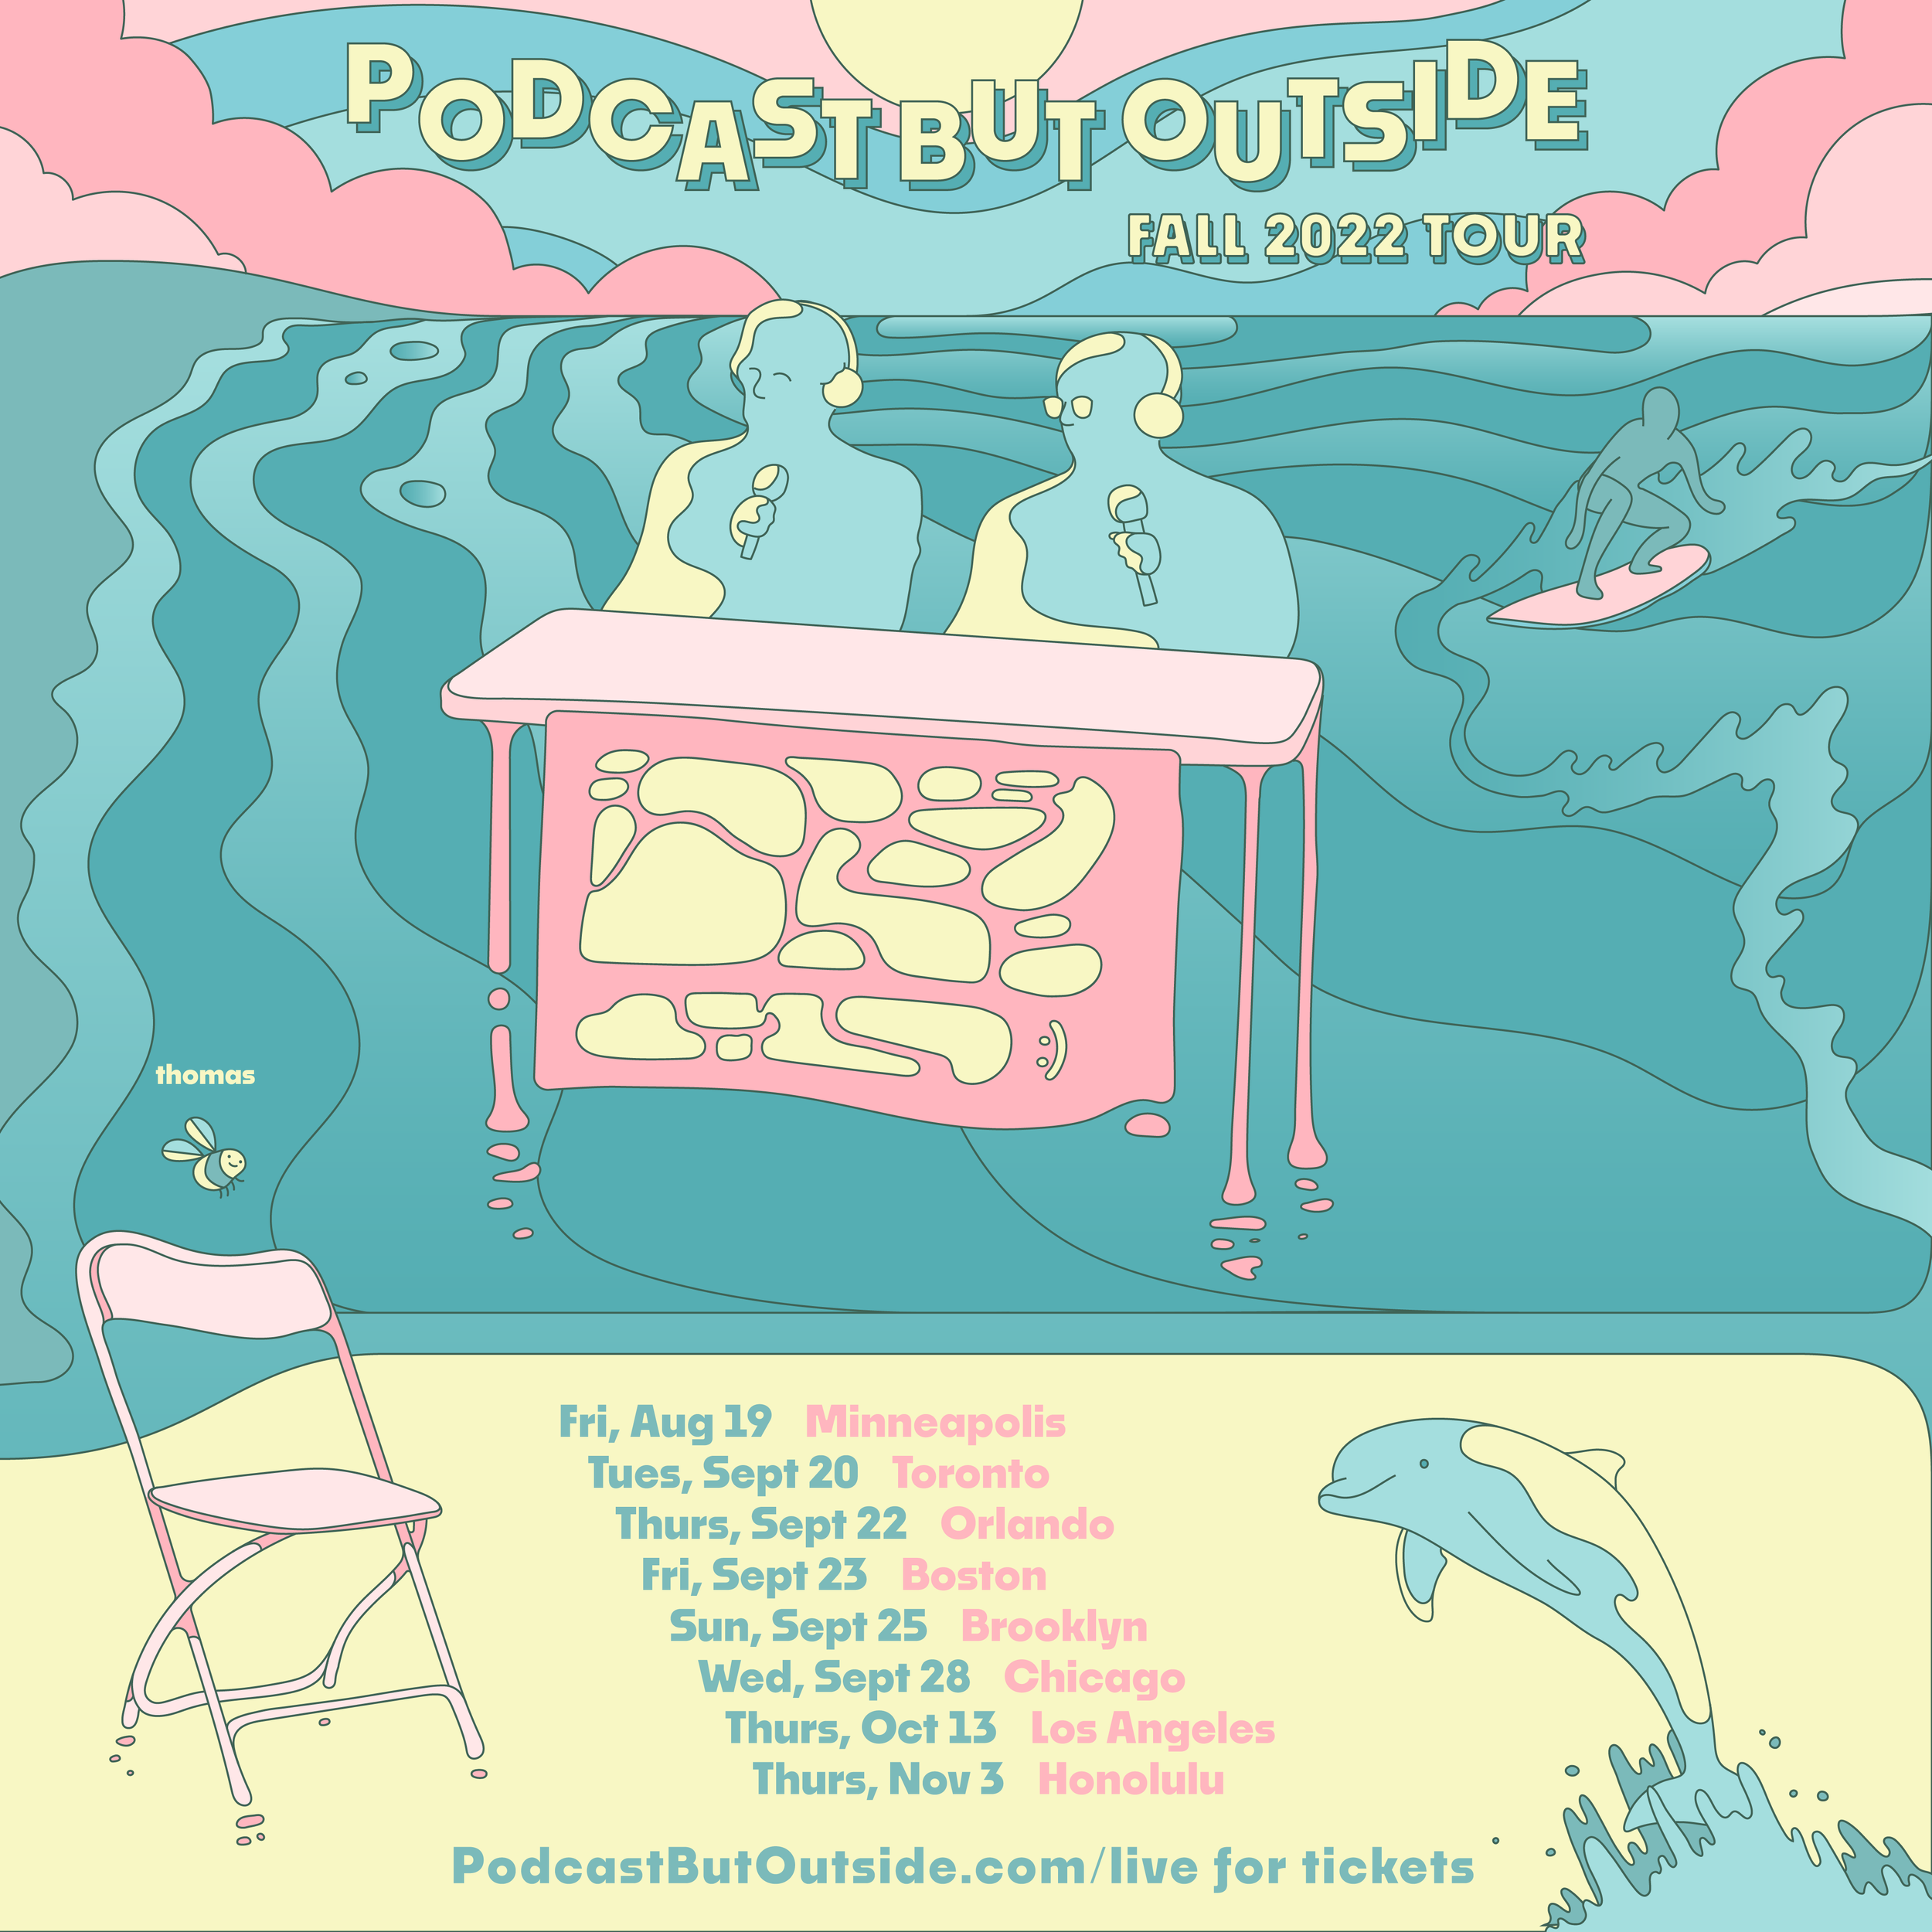 Podcast But Outside - Fall 2022 Tour